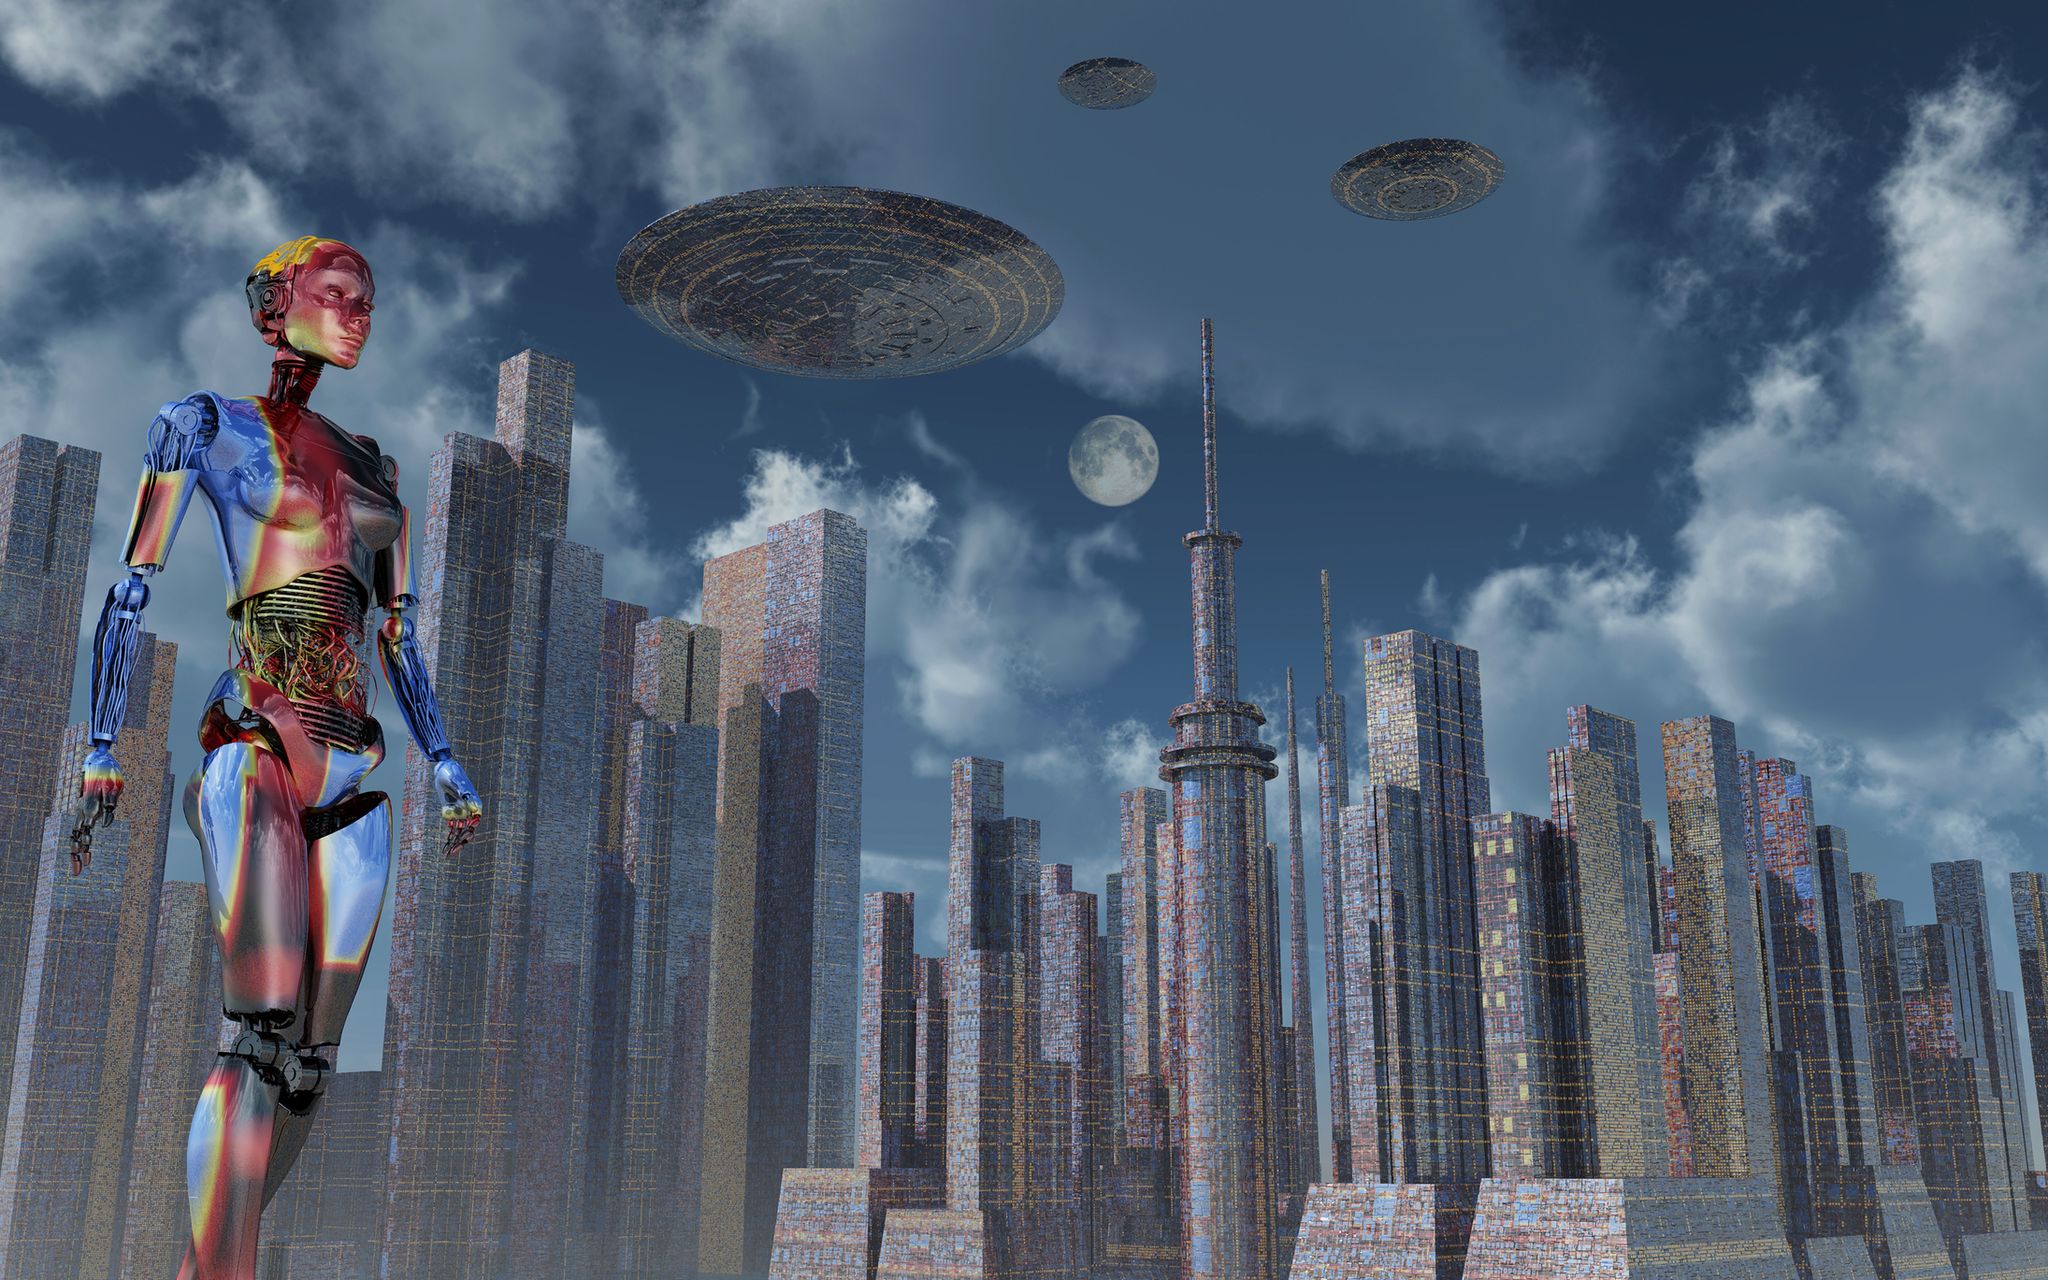 a futuristic city where robots and flying saucers are common place